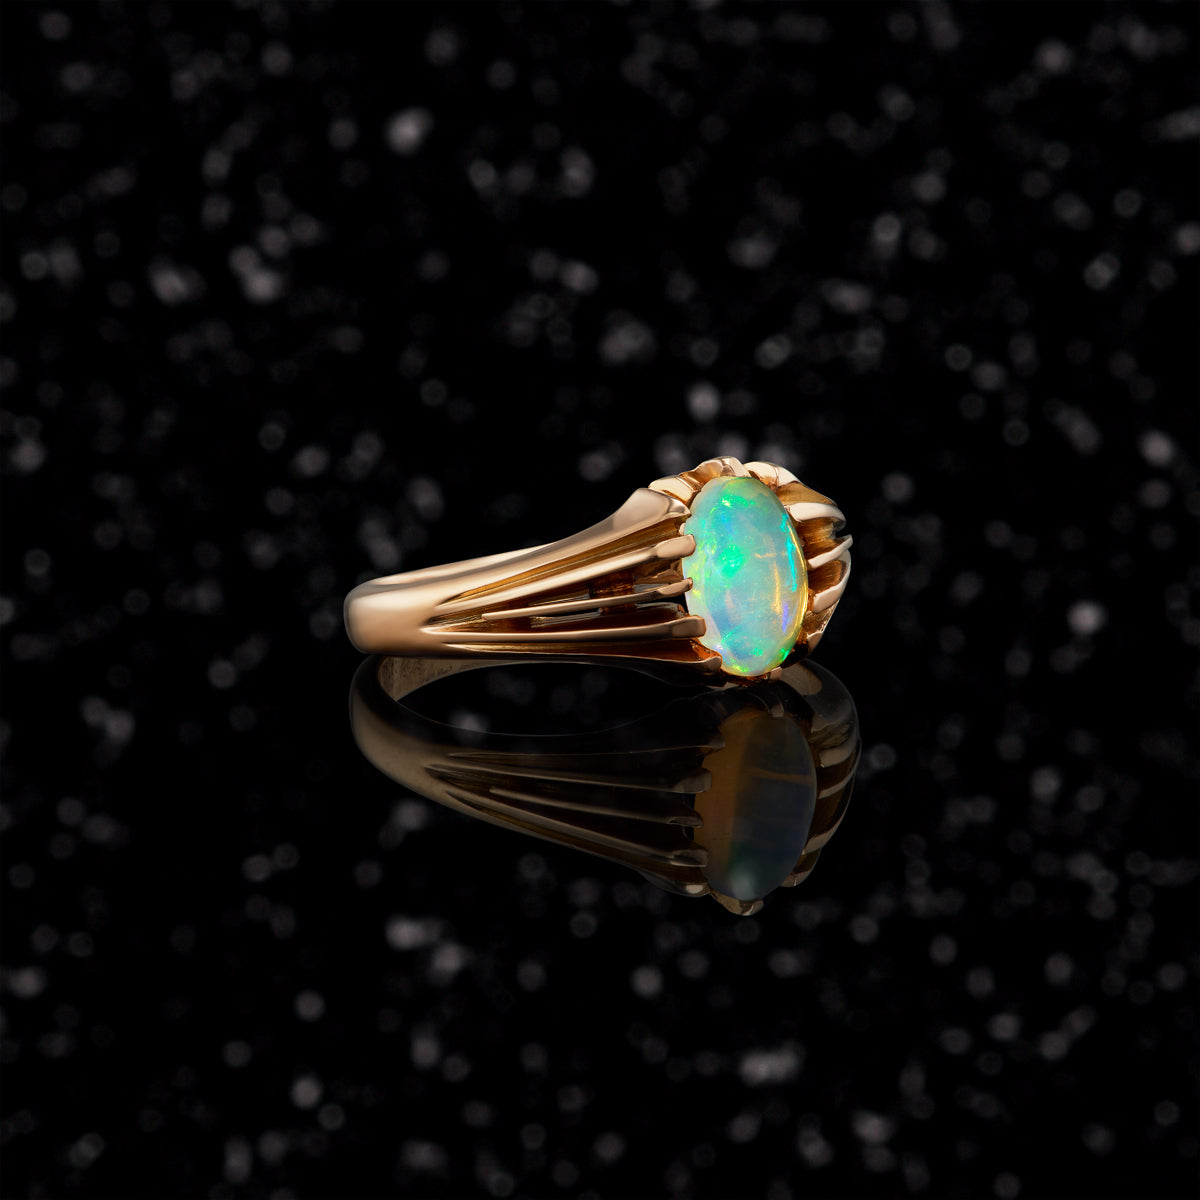 THE OPAL BUTTERCUP RING